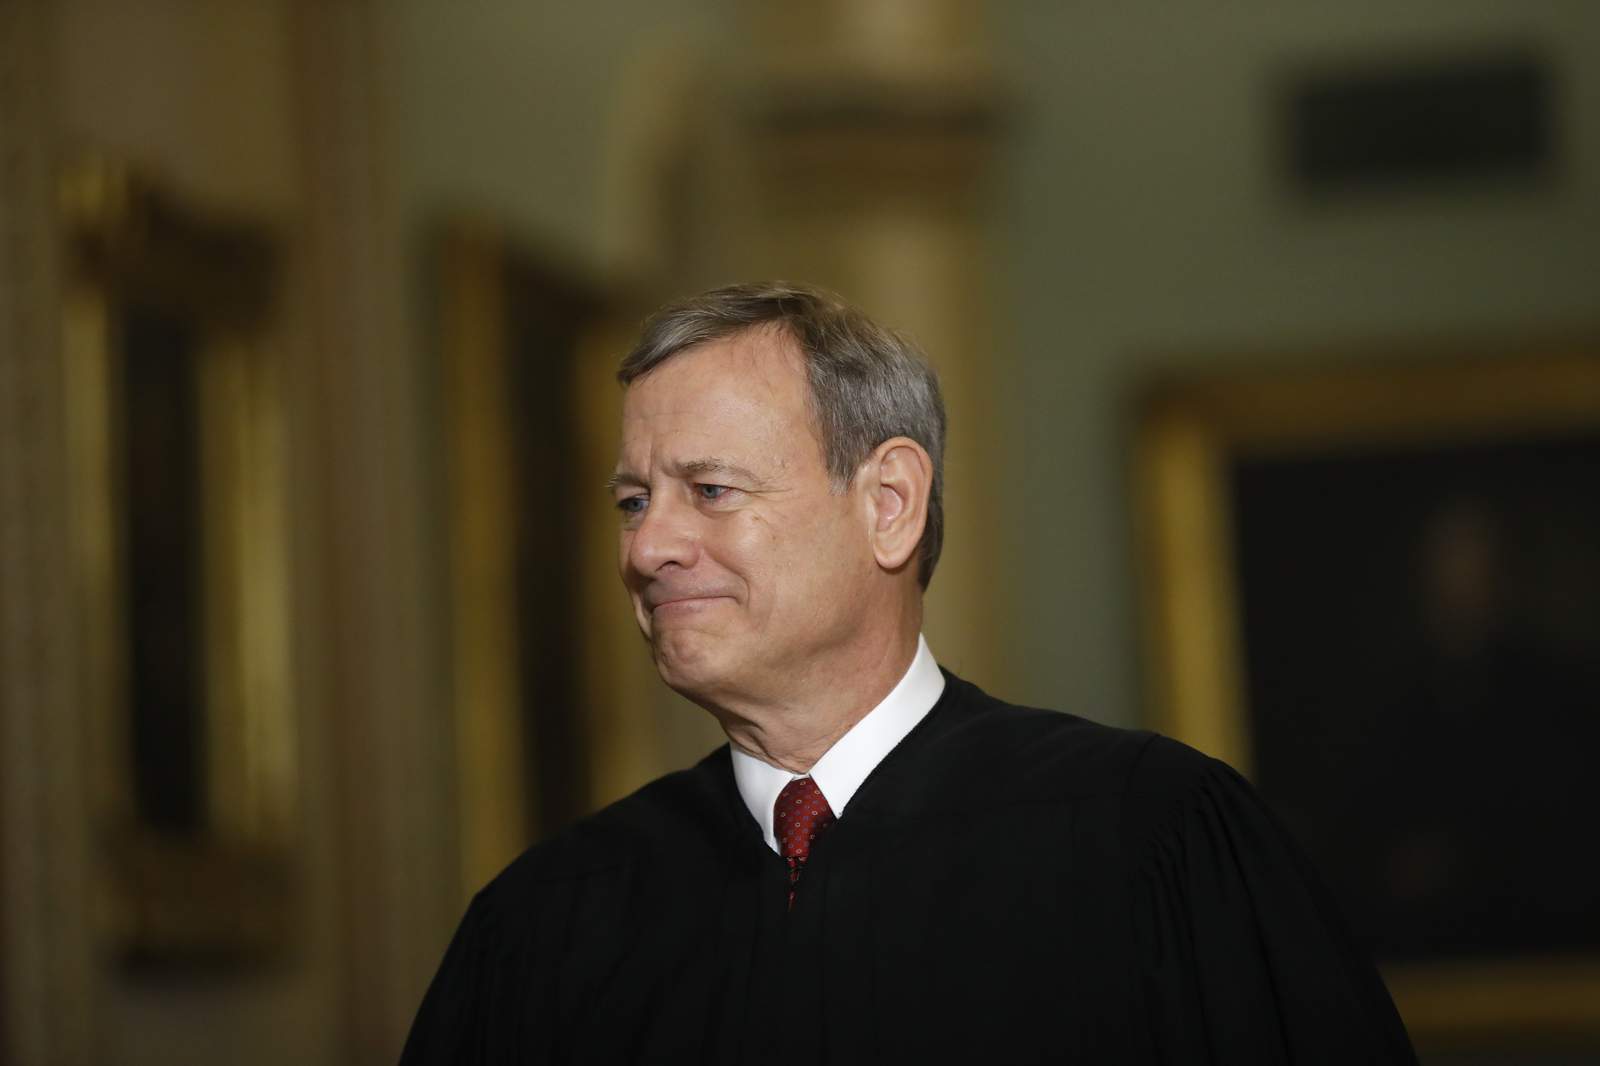 Chief justice says pandemic teaches humility, compassion